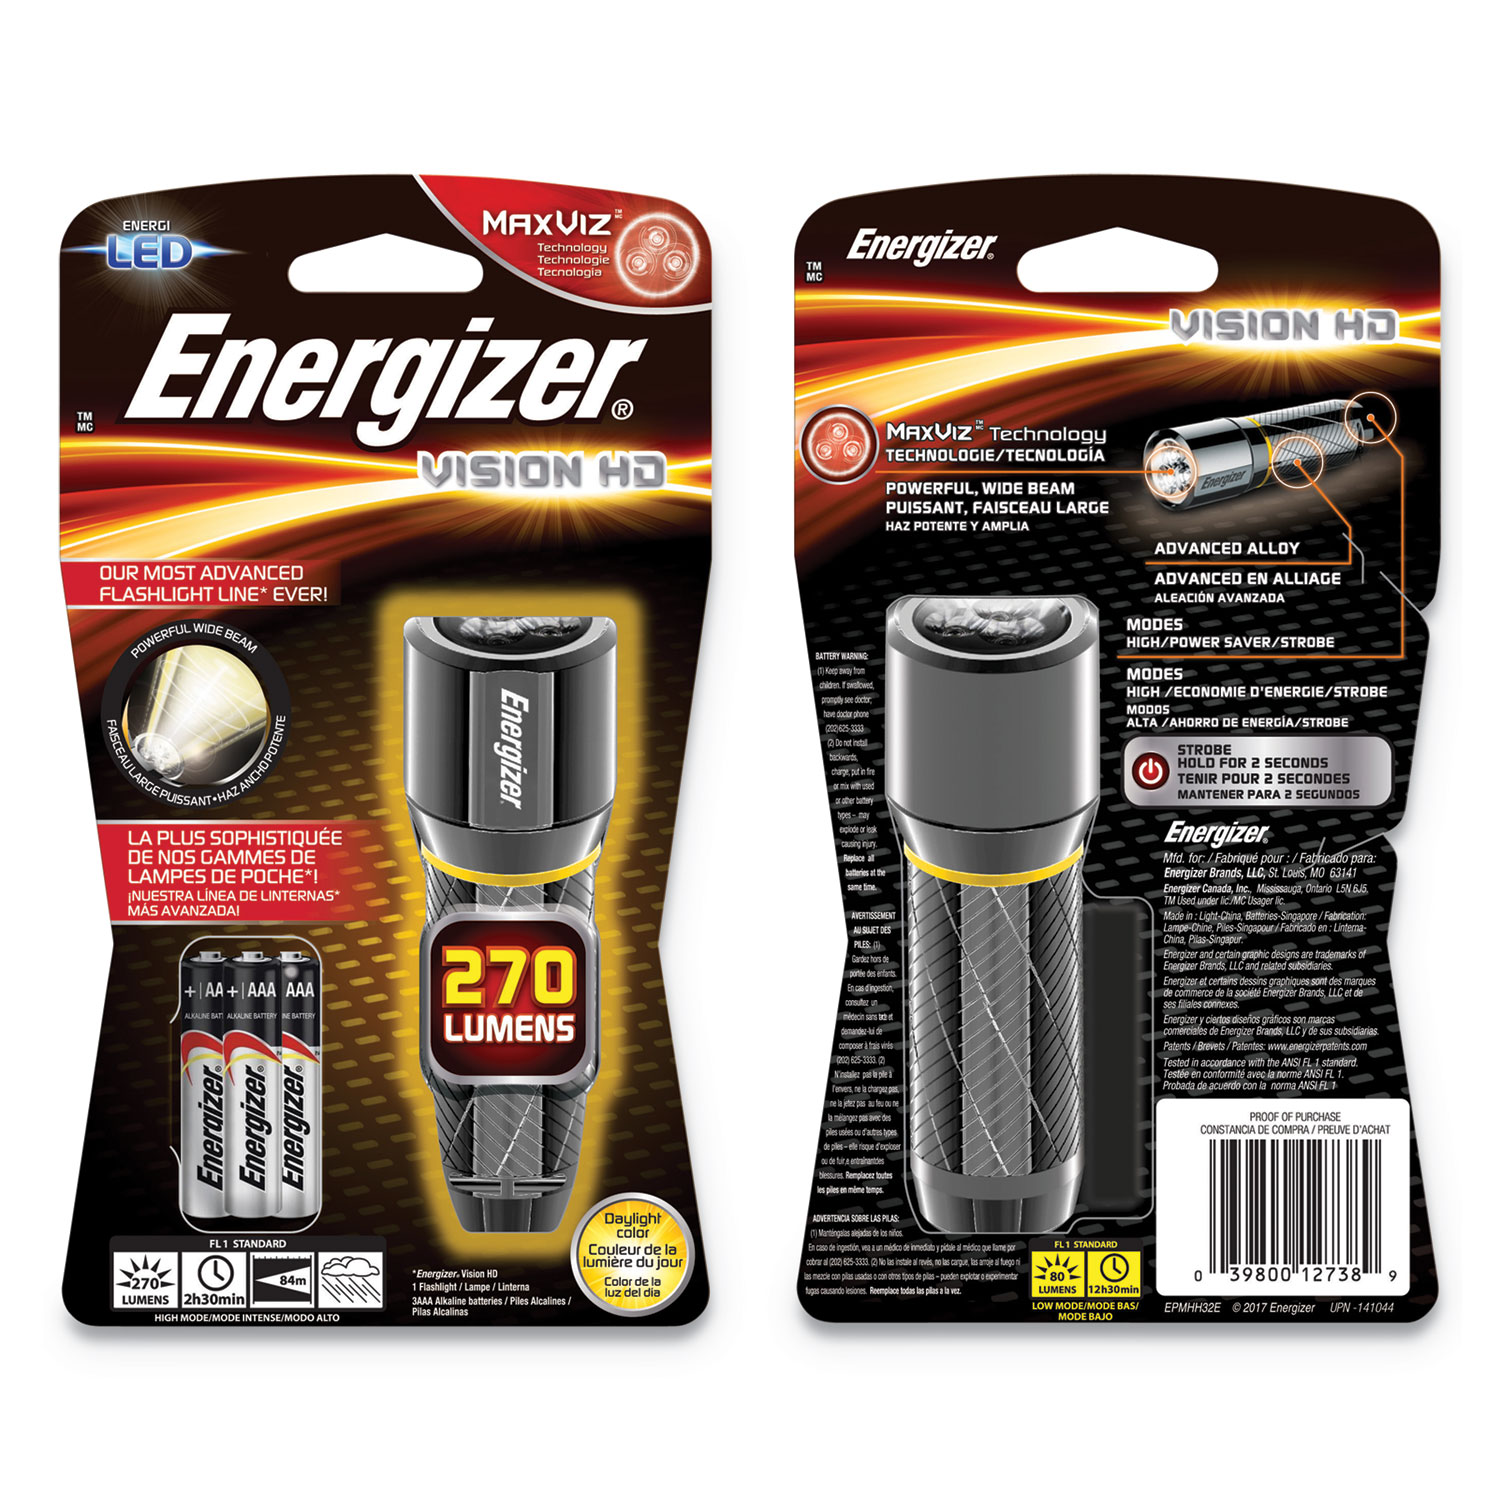  Energizer EPMHH32E Vision HD, 3 AAA Batteries (Included), Silver (EVEEPMHH32E) 